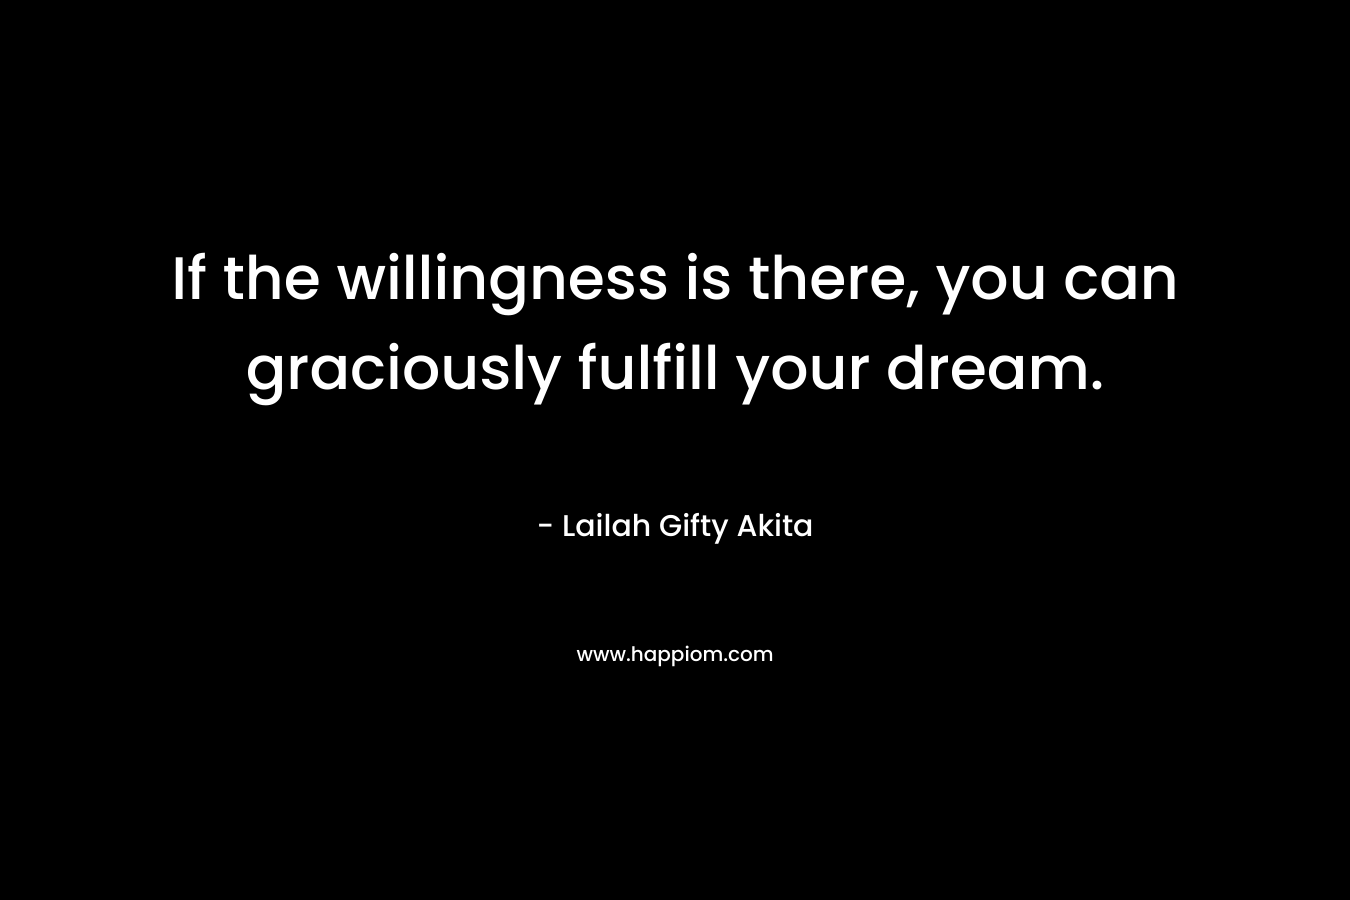 If the willingness is there, you can graciously fulfill your dream.